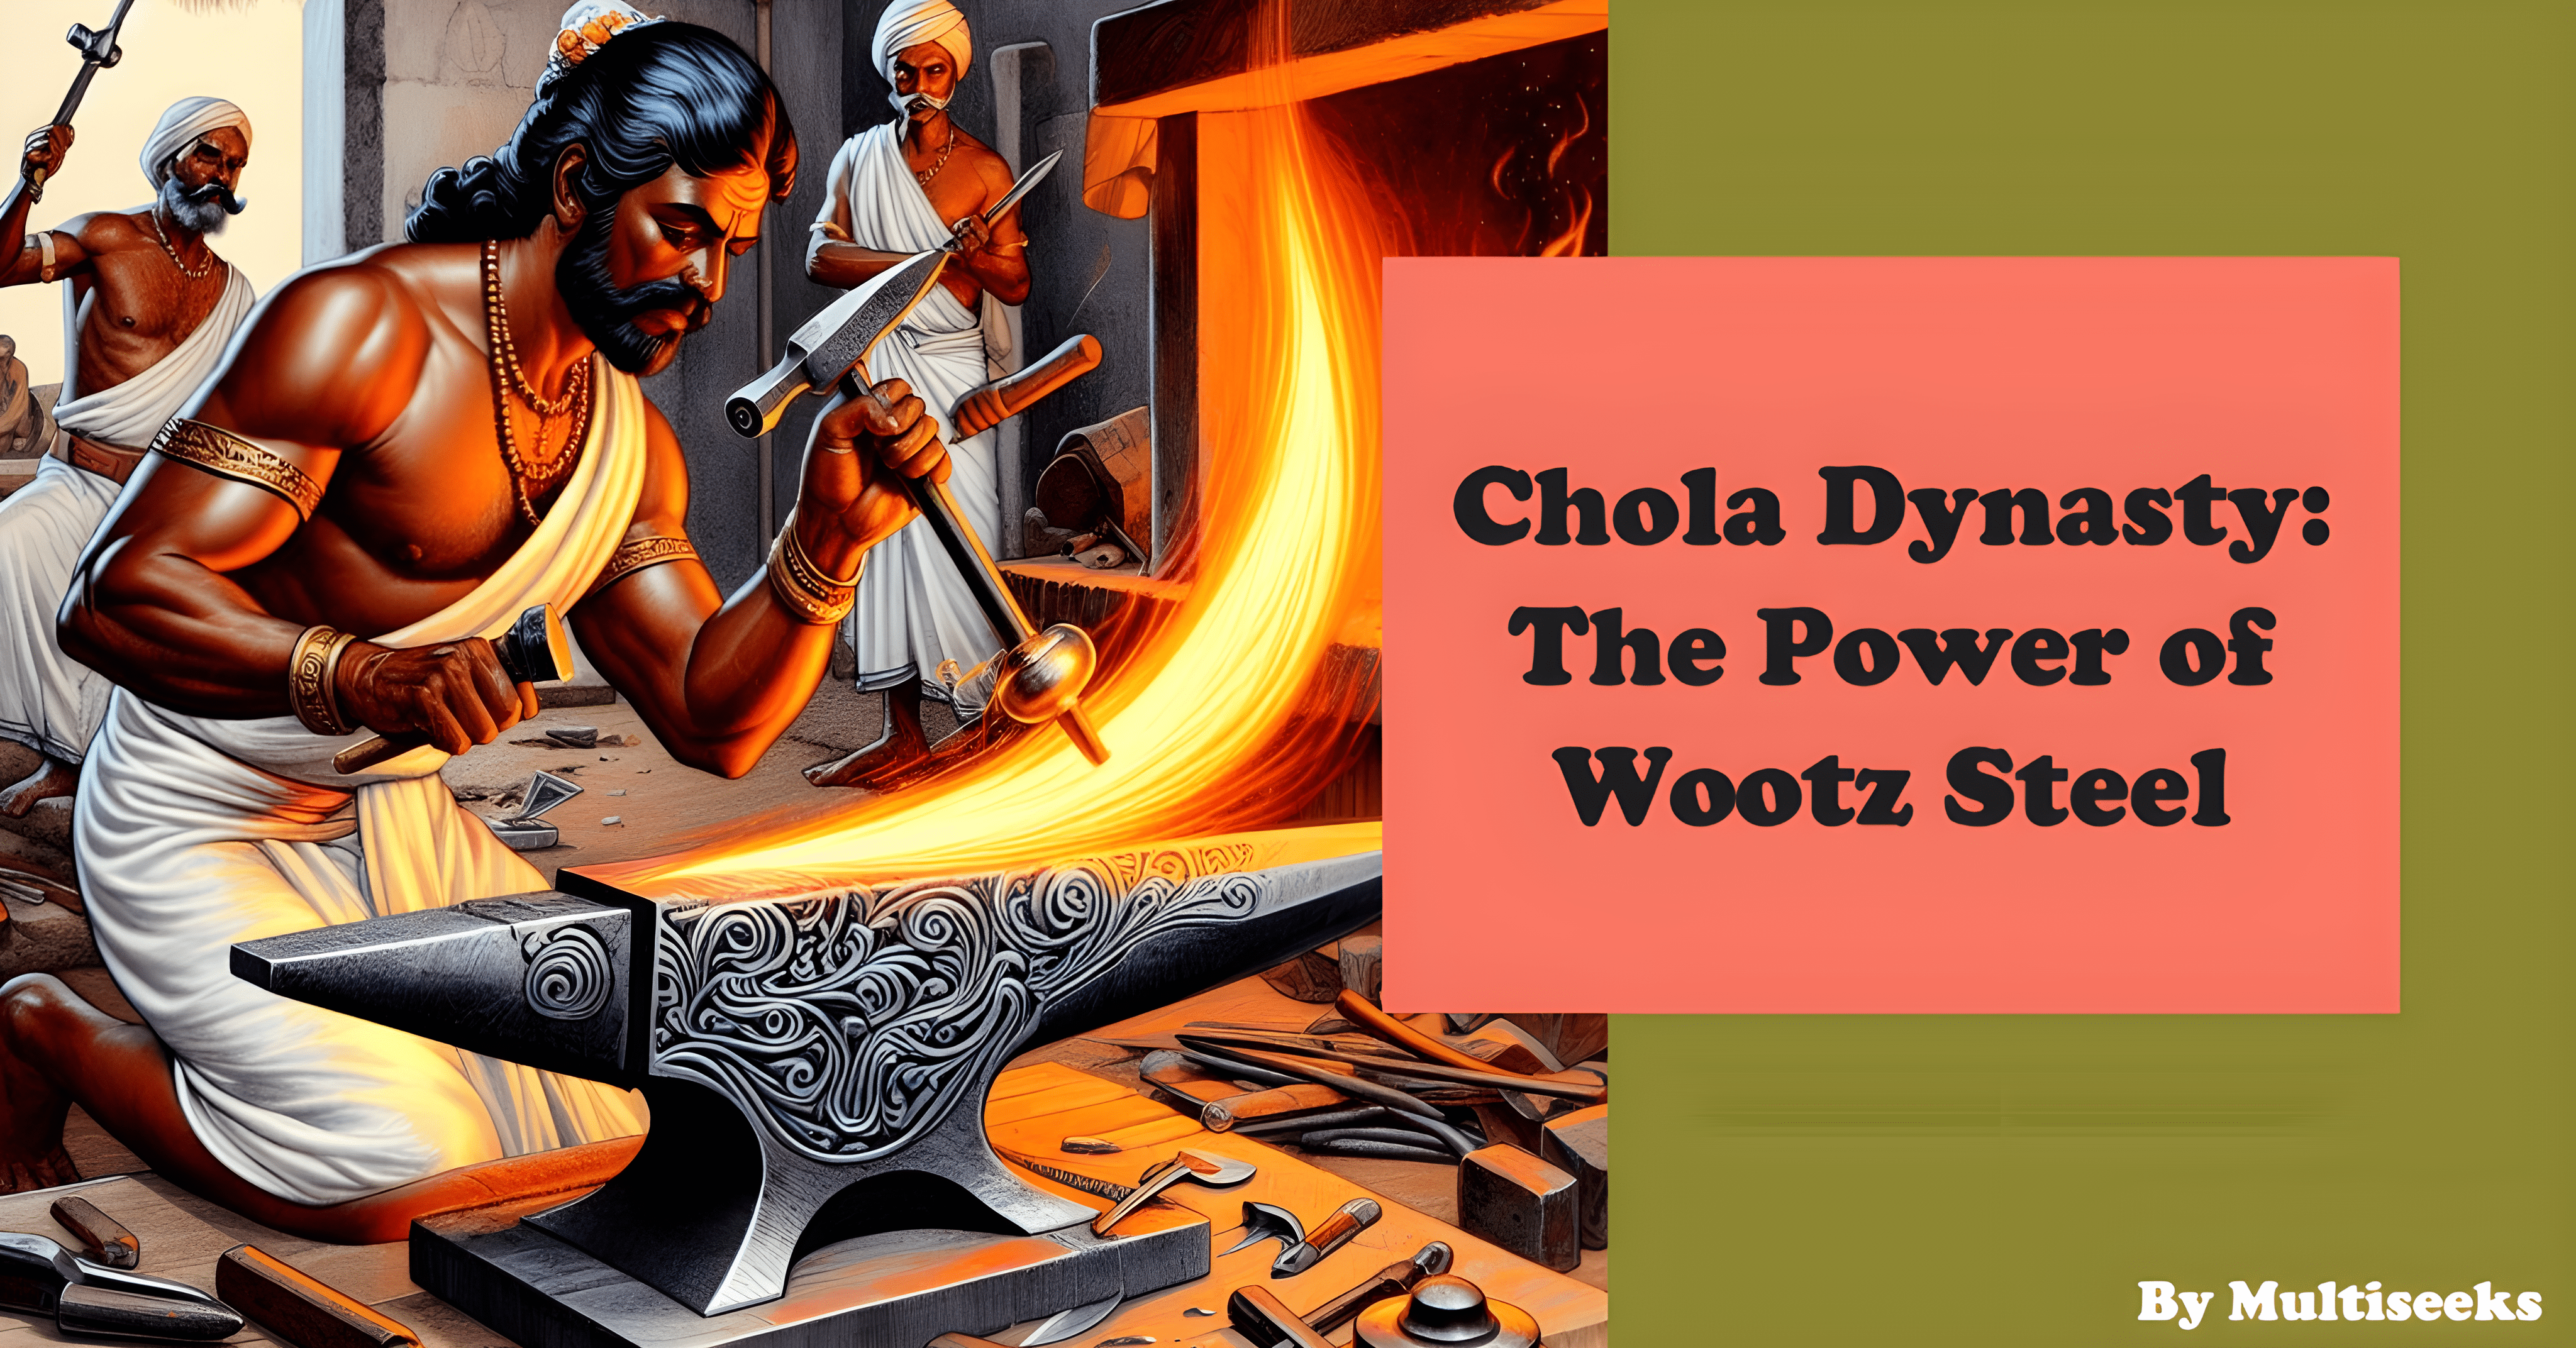 Read more about the article Chola Dynasty: The Power of Wootz Steel